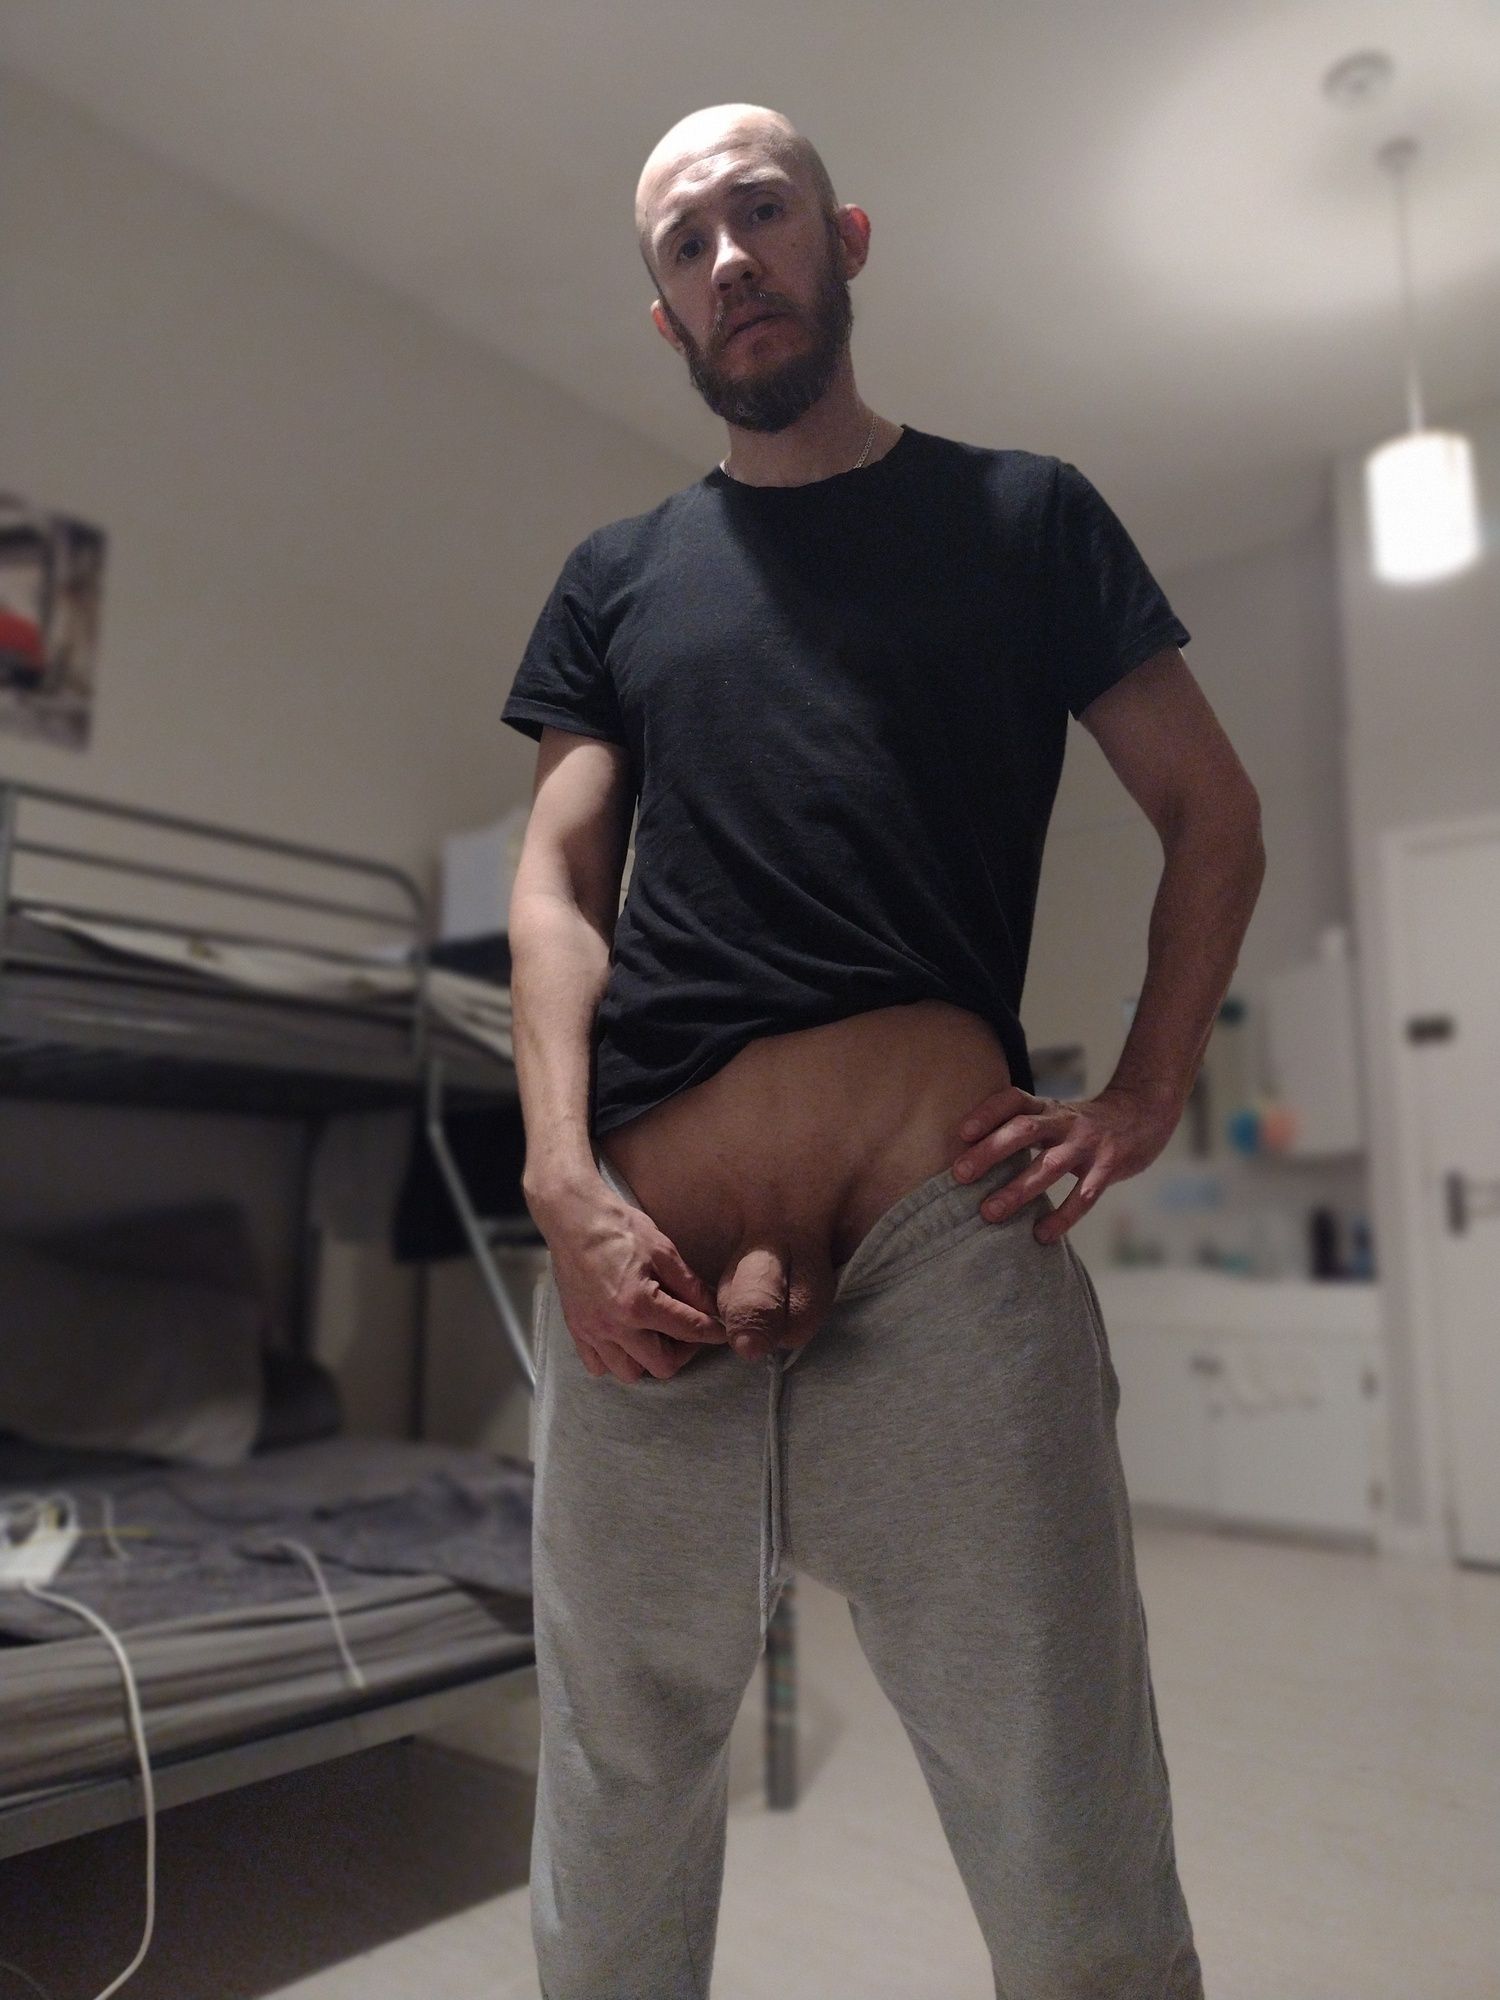 Showing soft dick #3